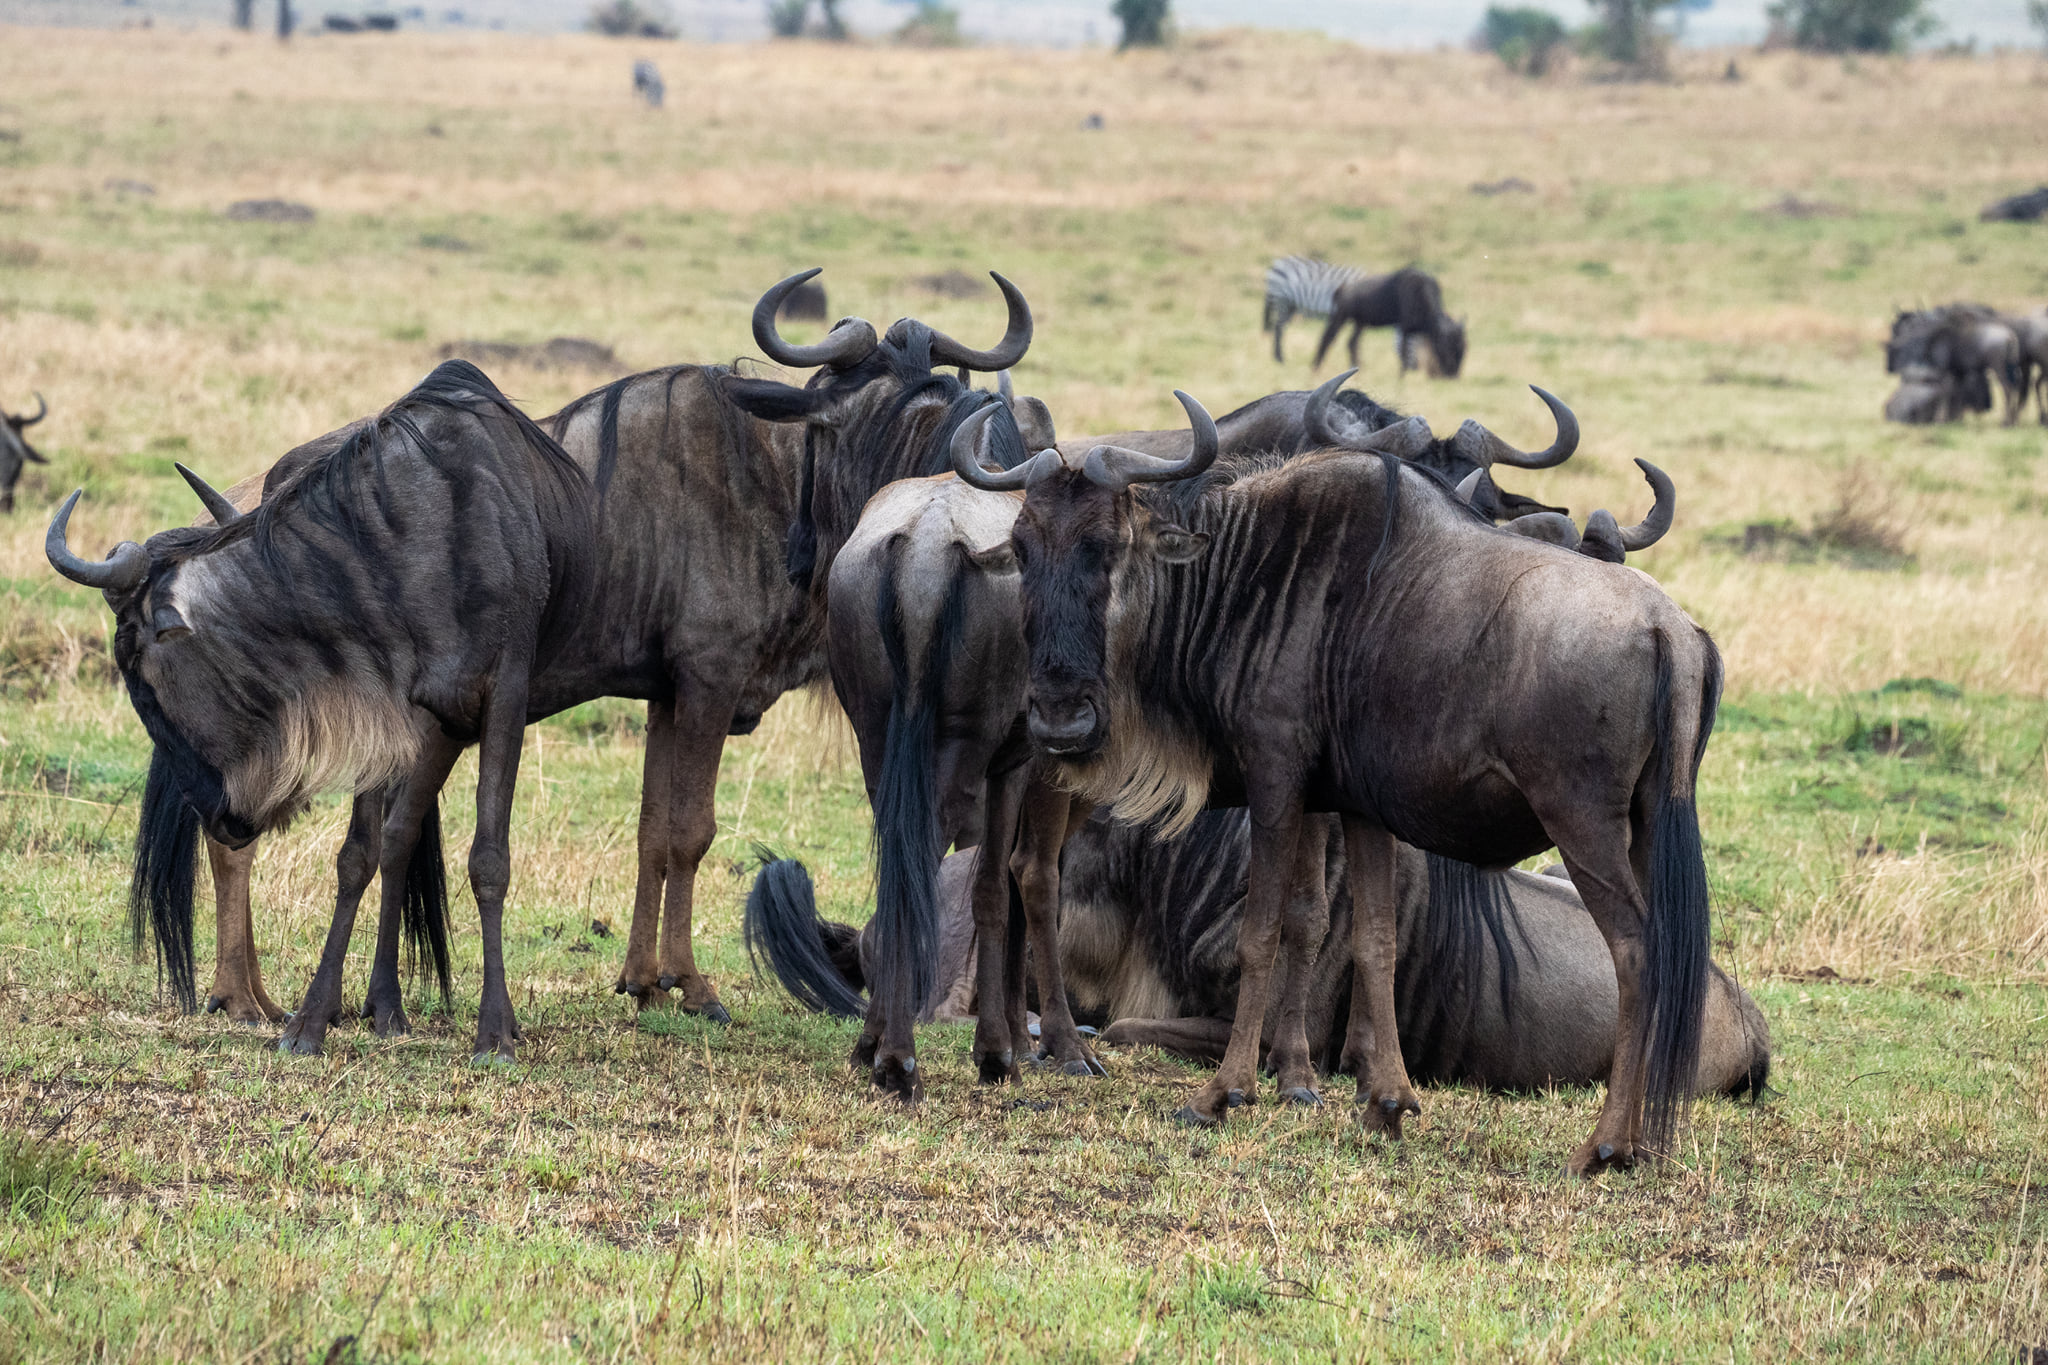 Animals to see in Serengeti National Park.